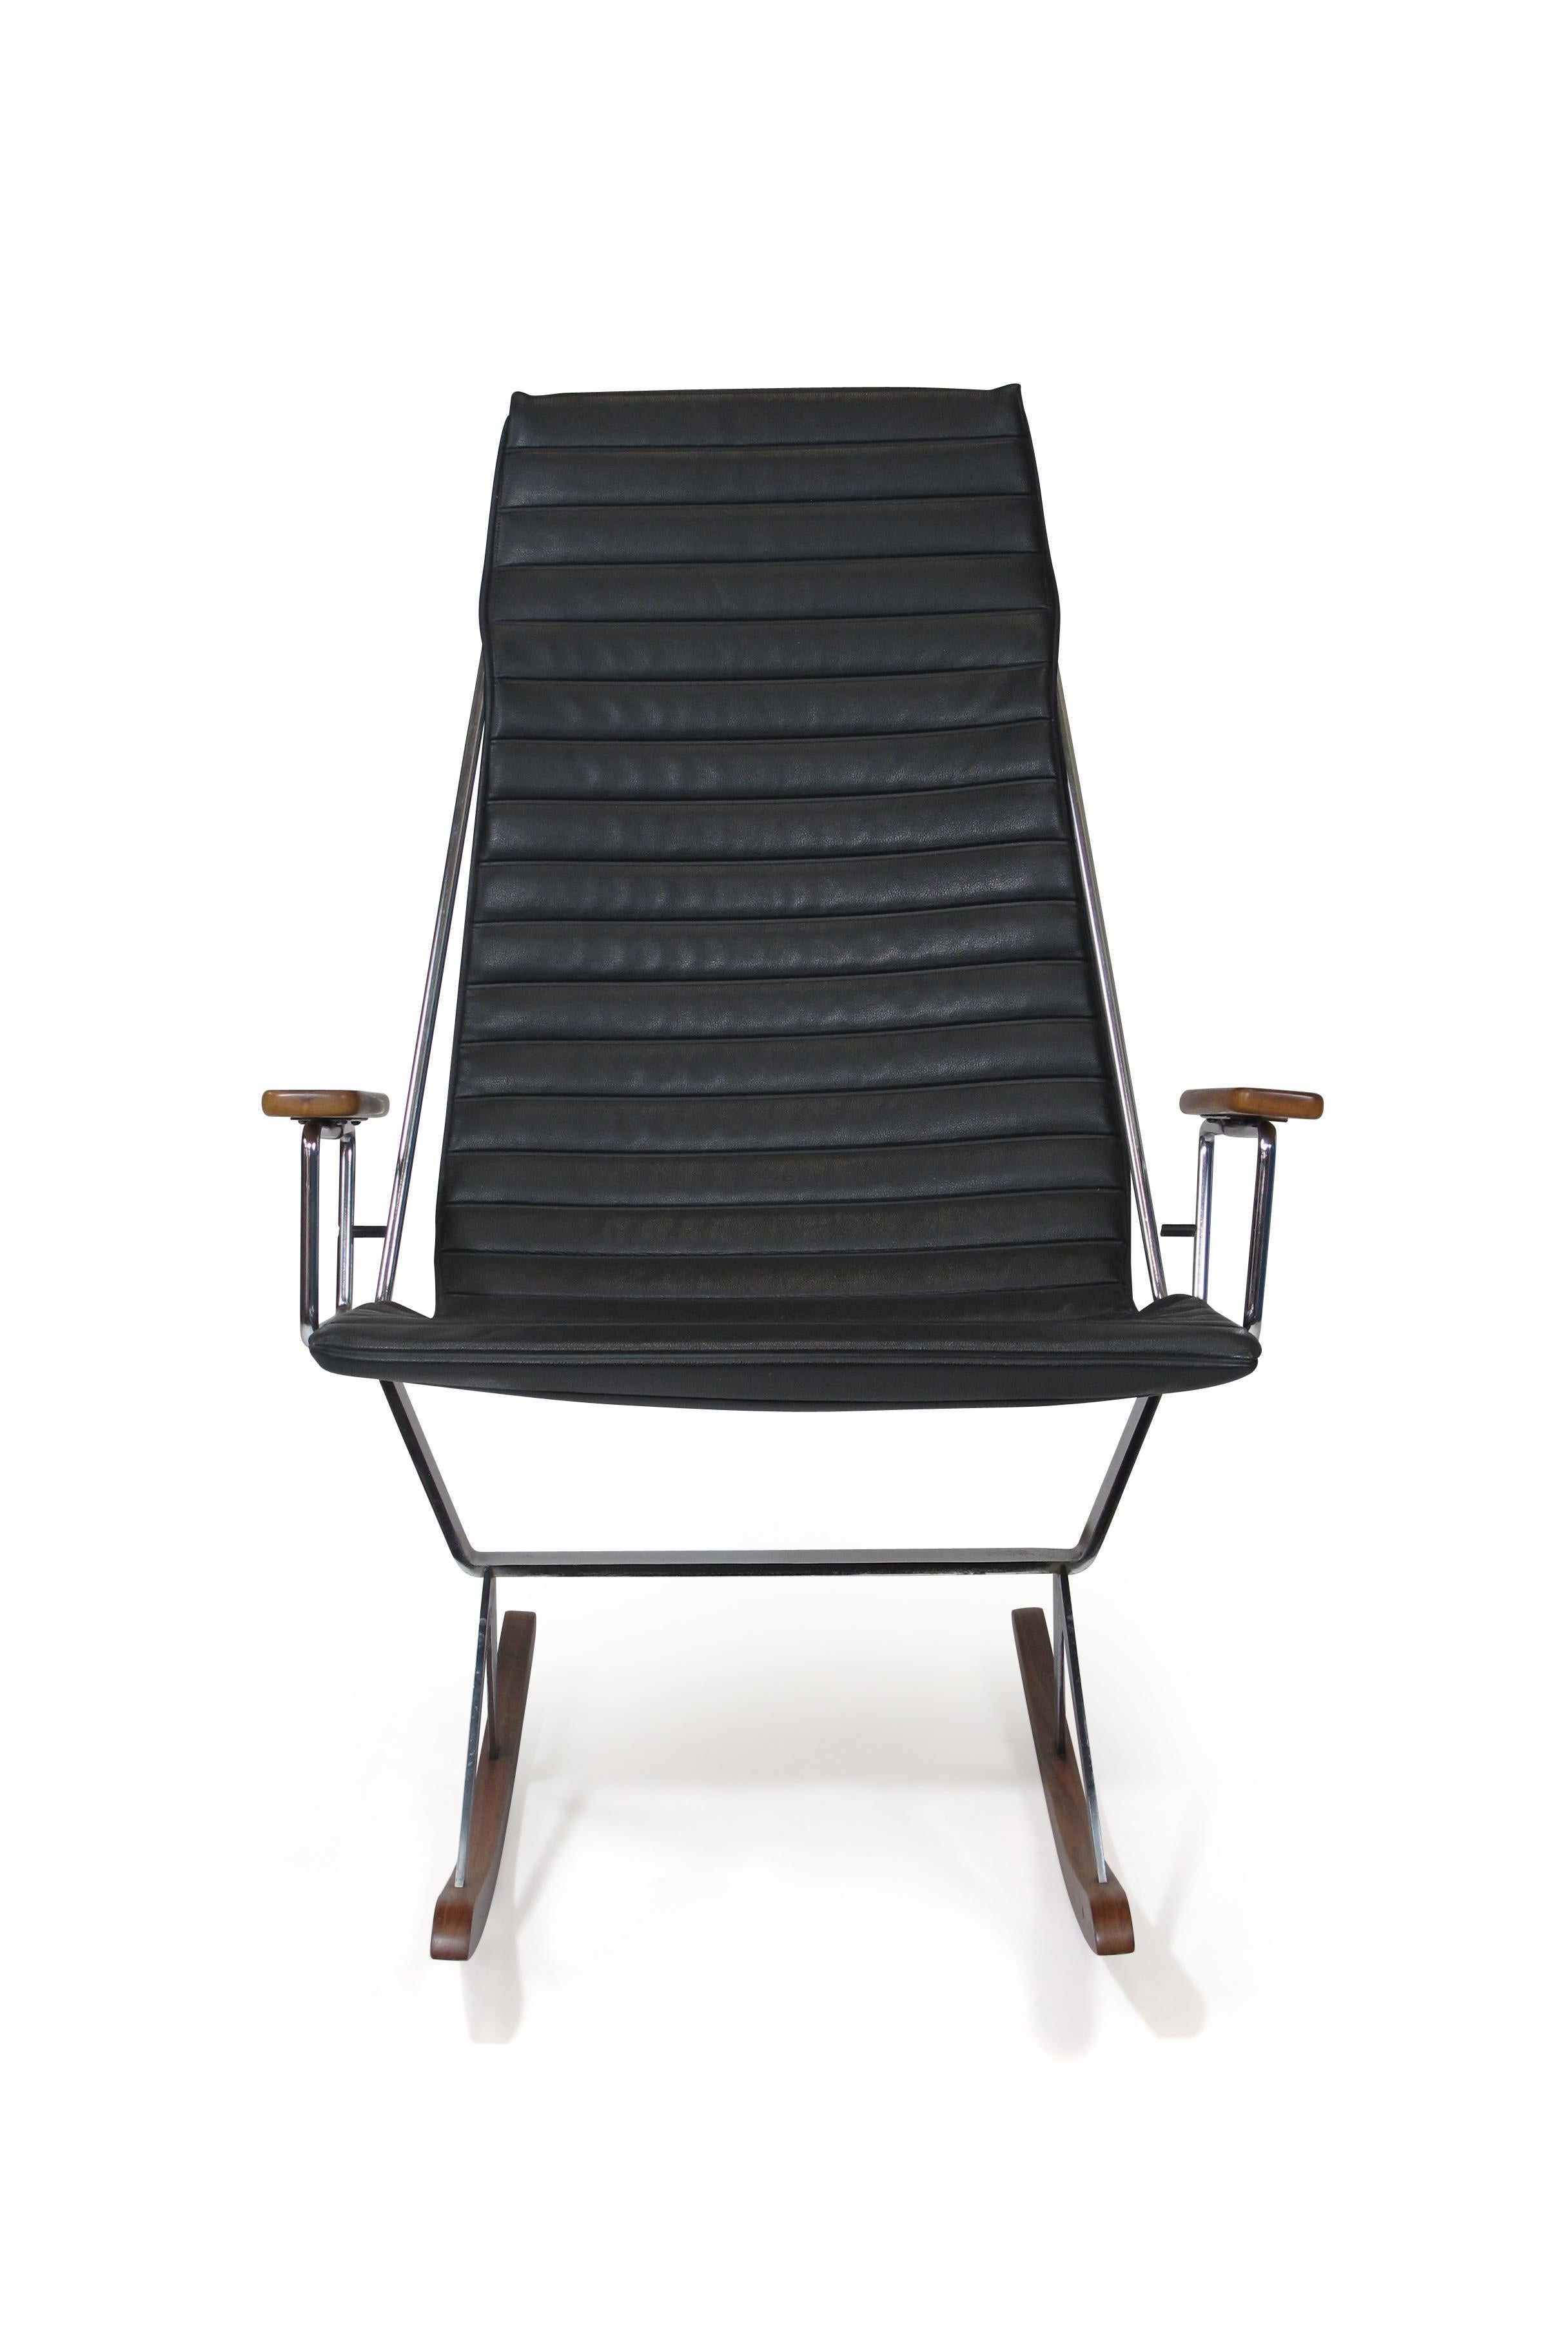 20th Century Gerald McCabe for Brown Saltman Steel and Walnut Rocking Chair For Sale